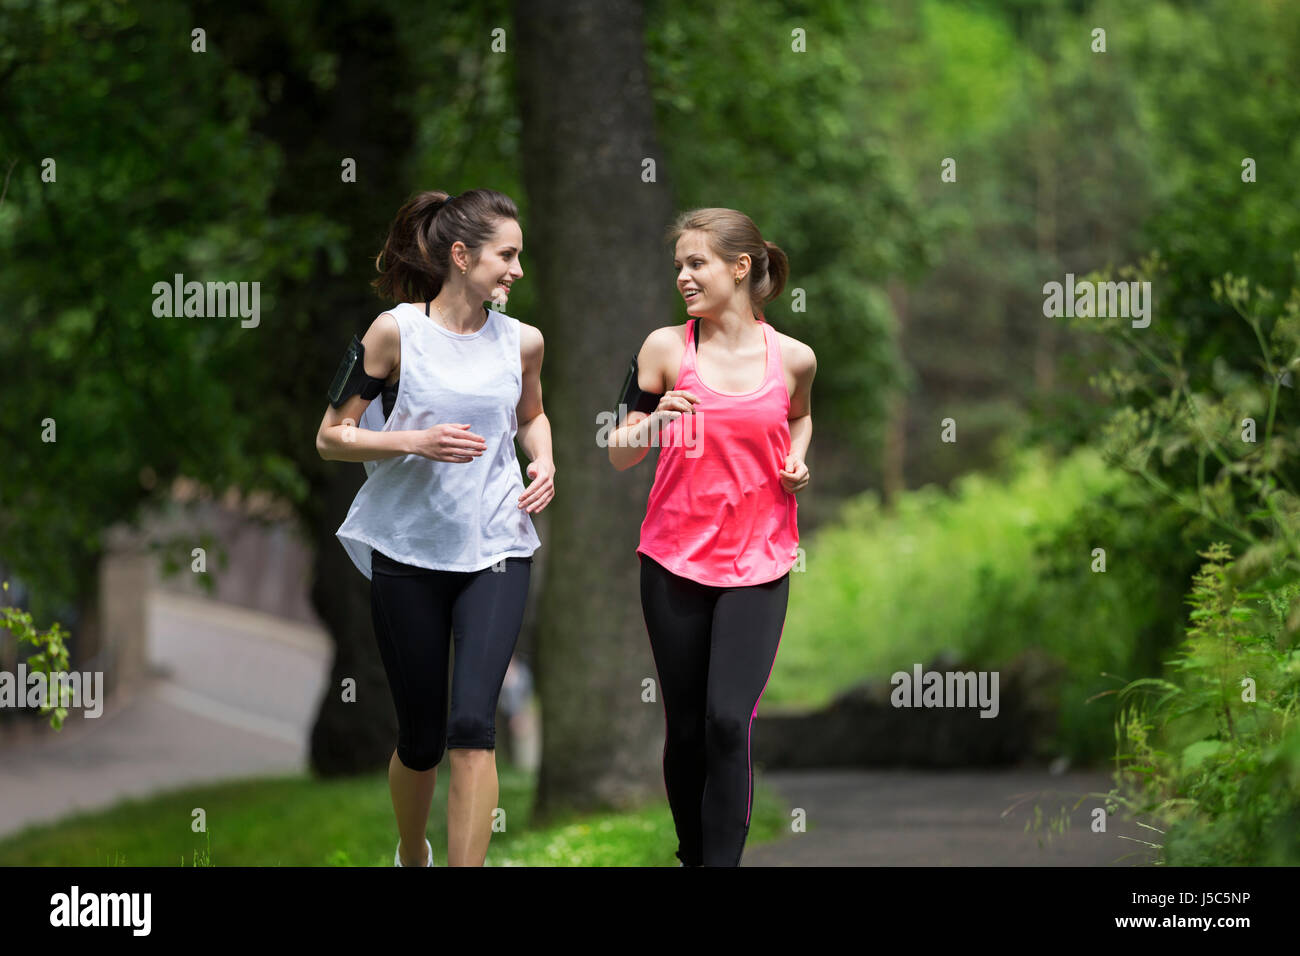 Two athletic woman running outdoors. Action and healthy lifestyle concept. Stock Photo